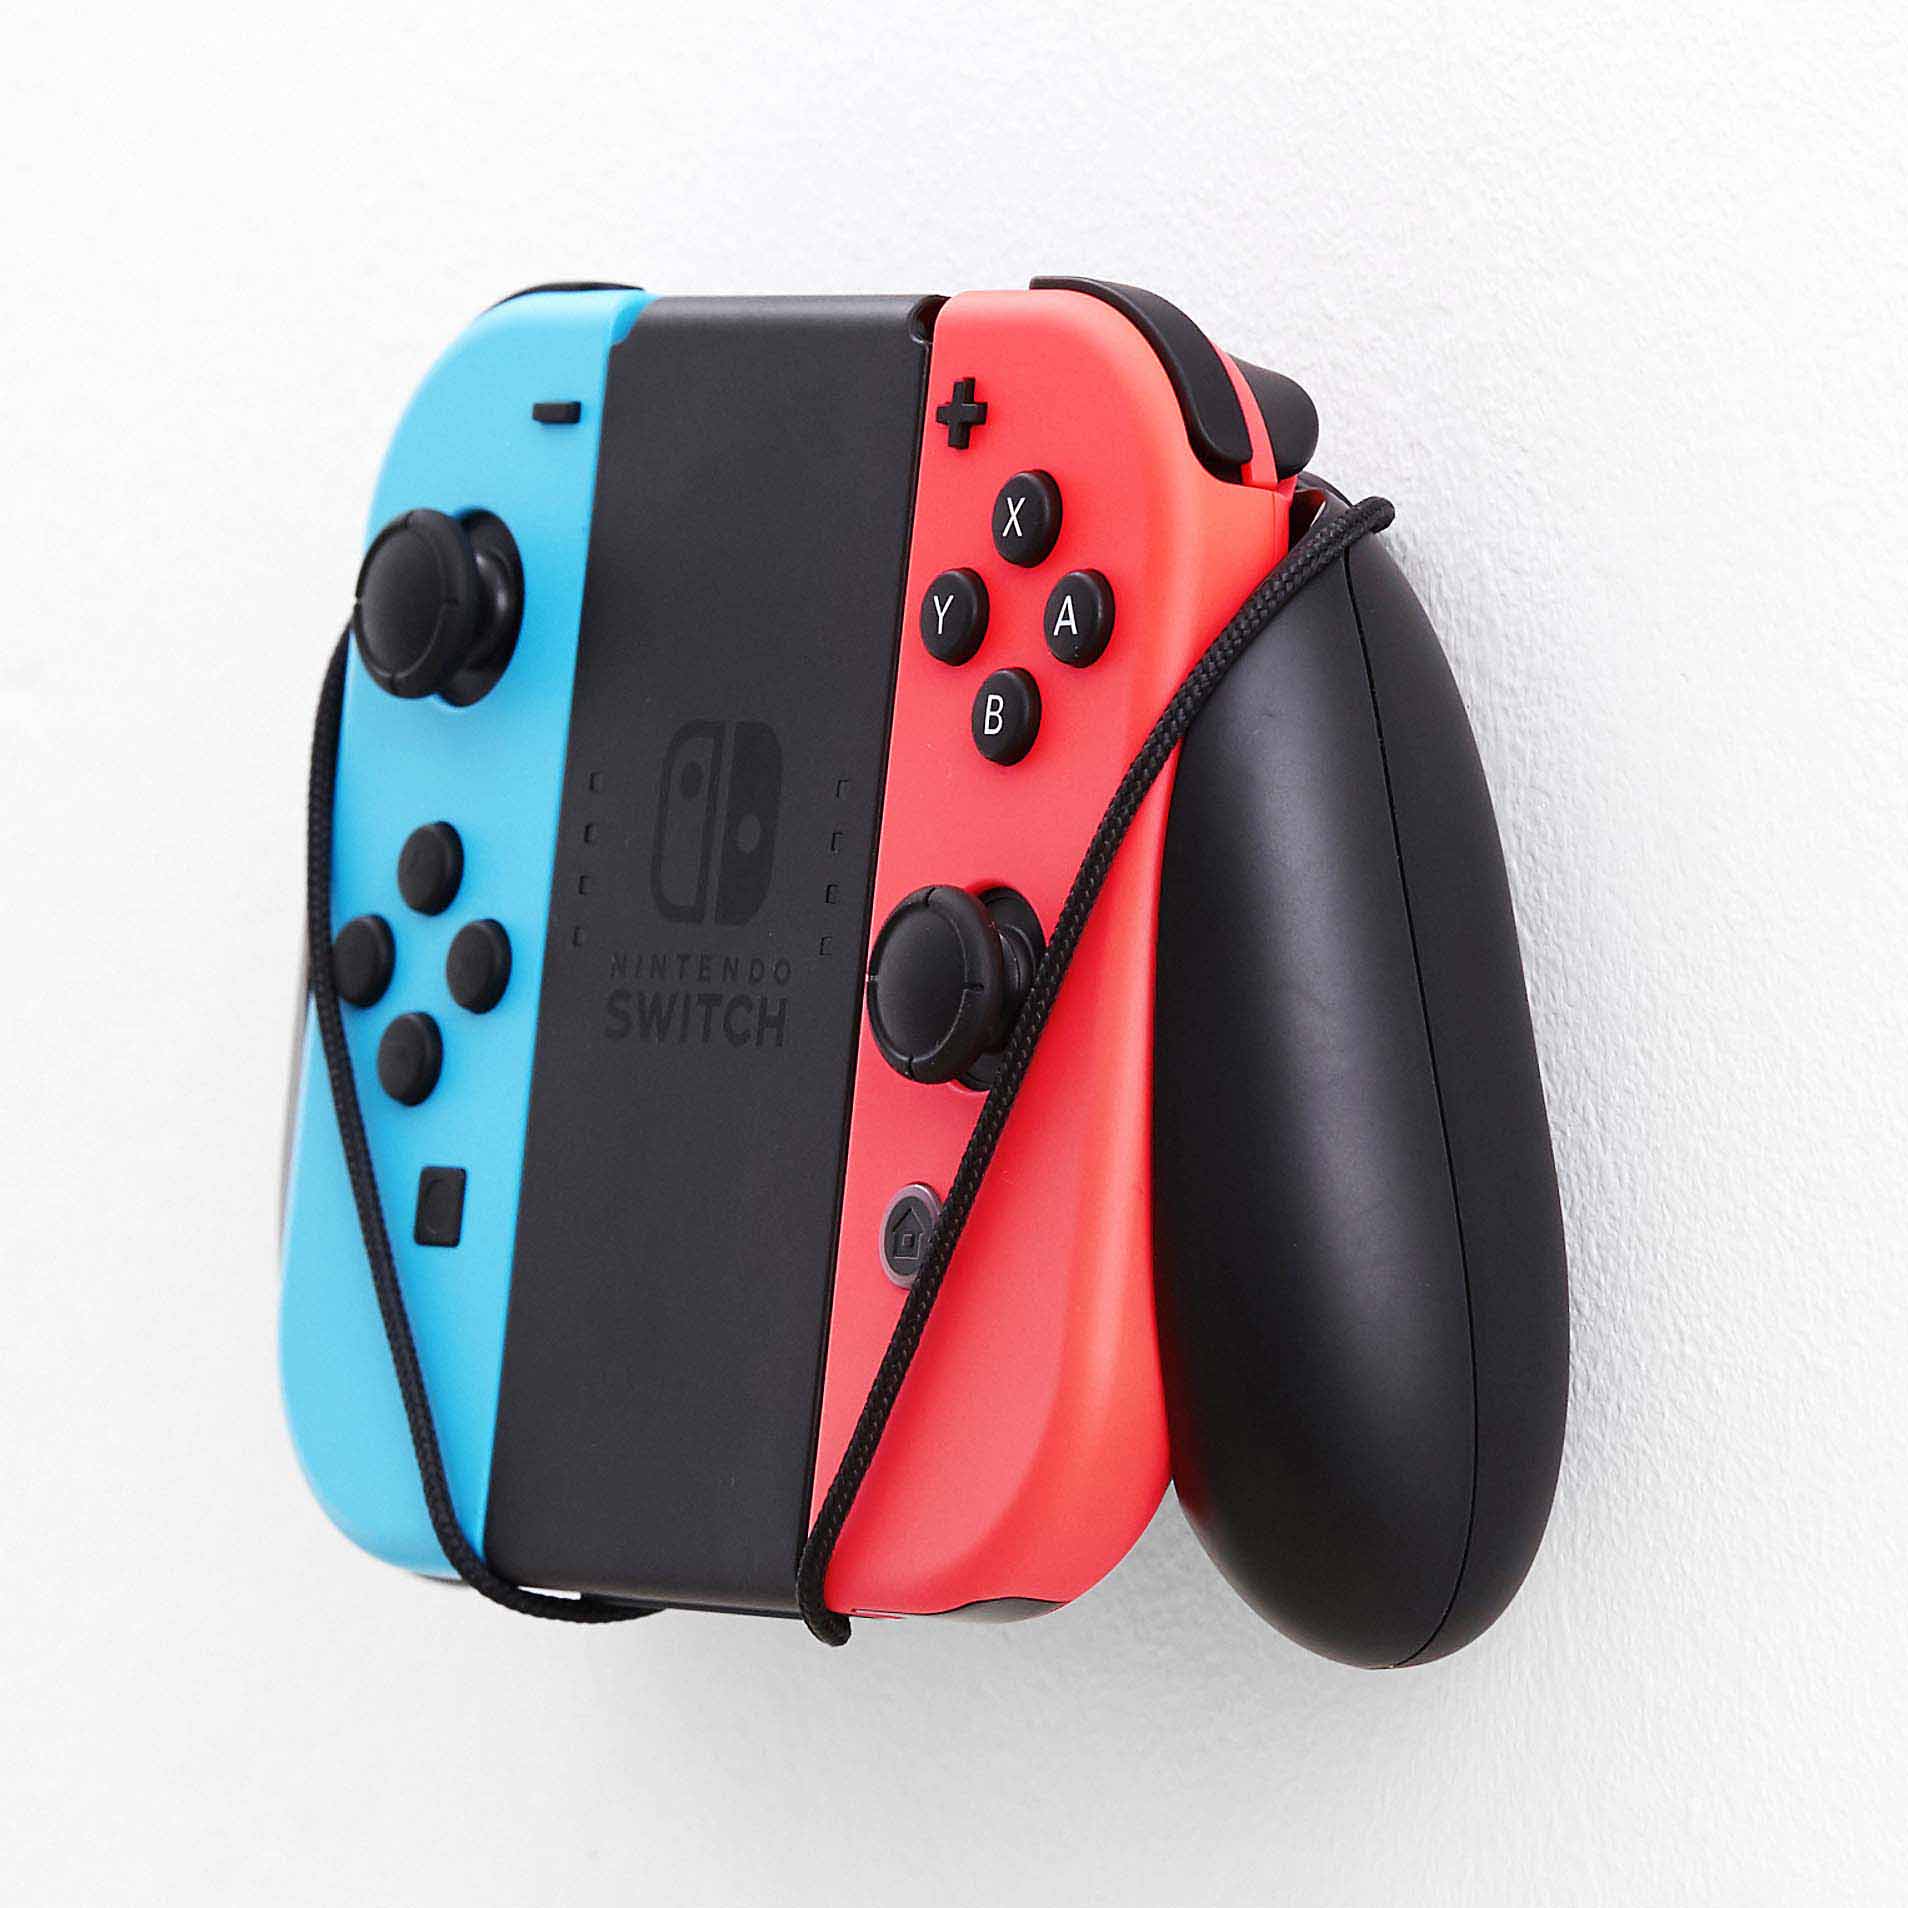 Nintendo Switch Dock Wall Mount by FLOATING GRIP